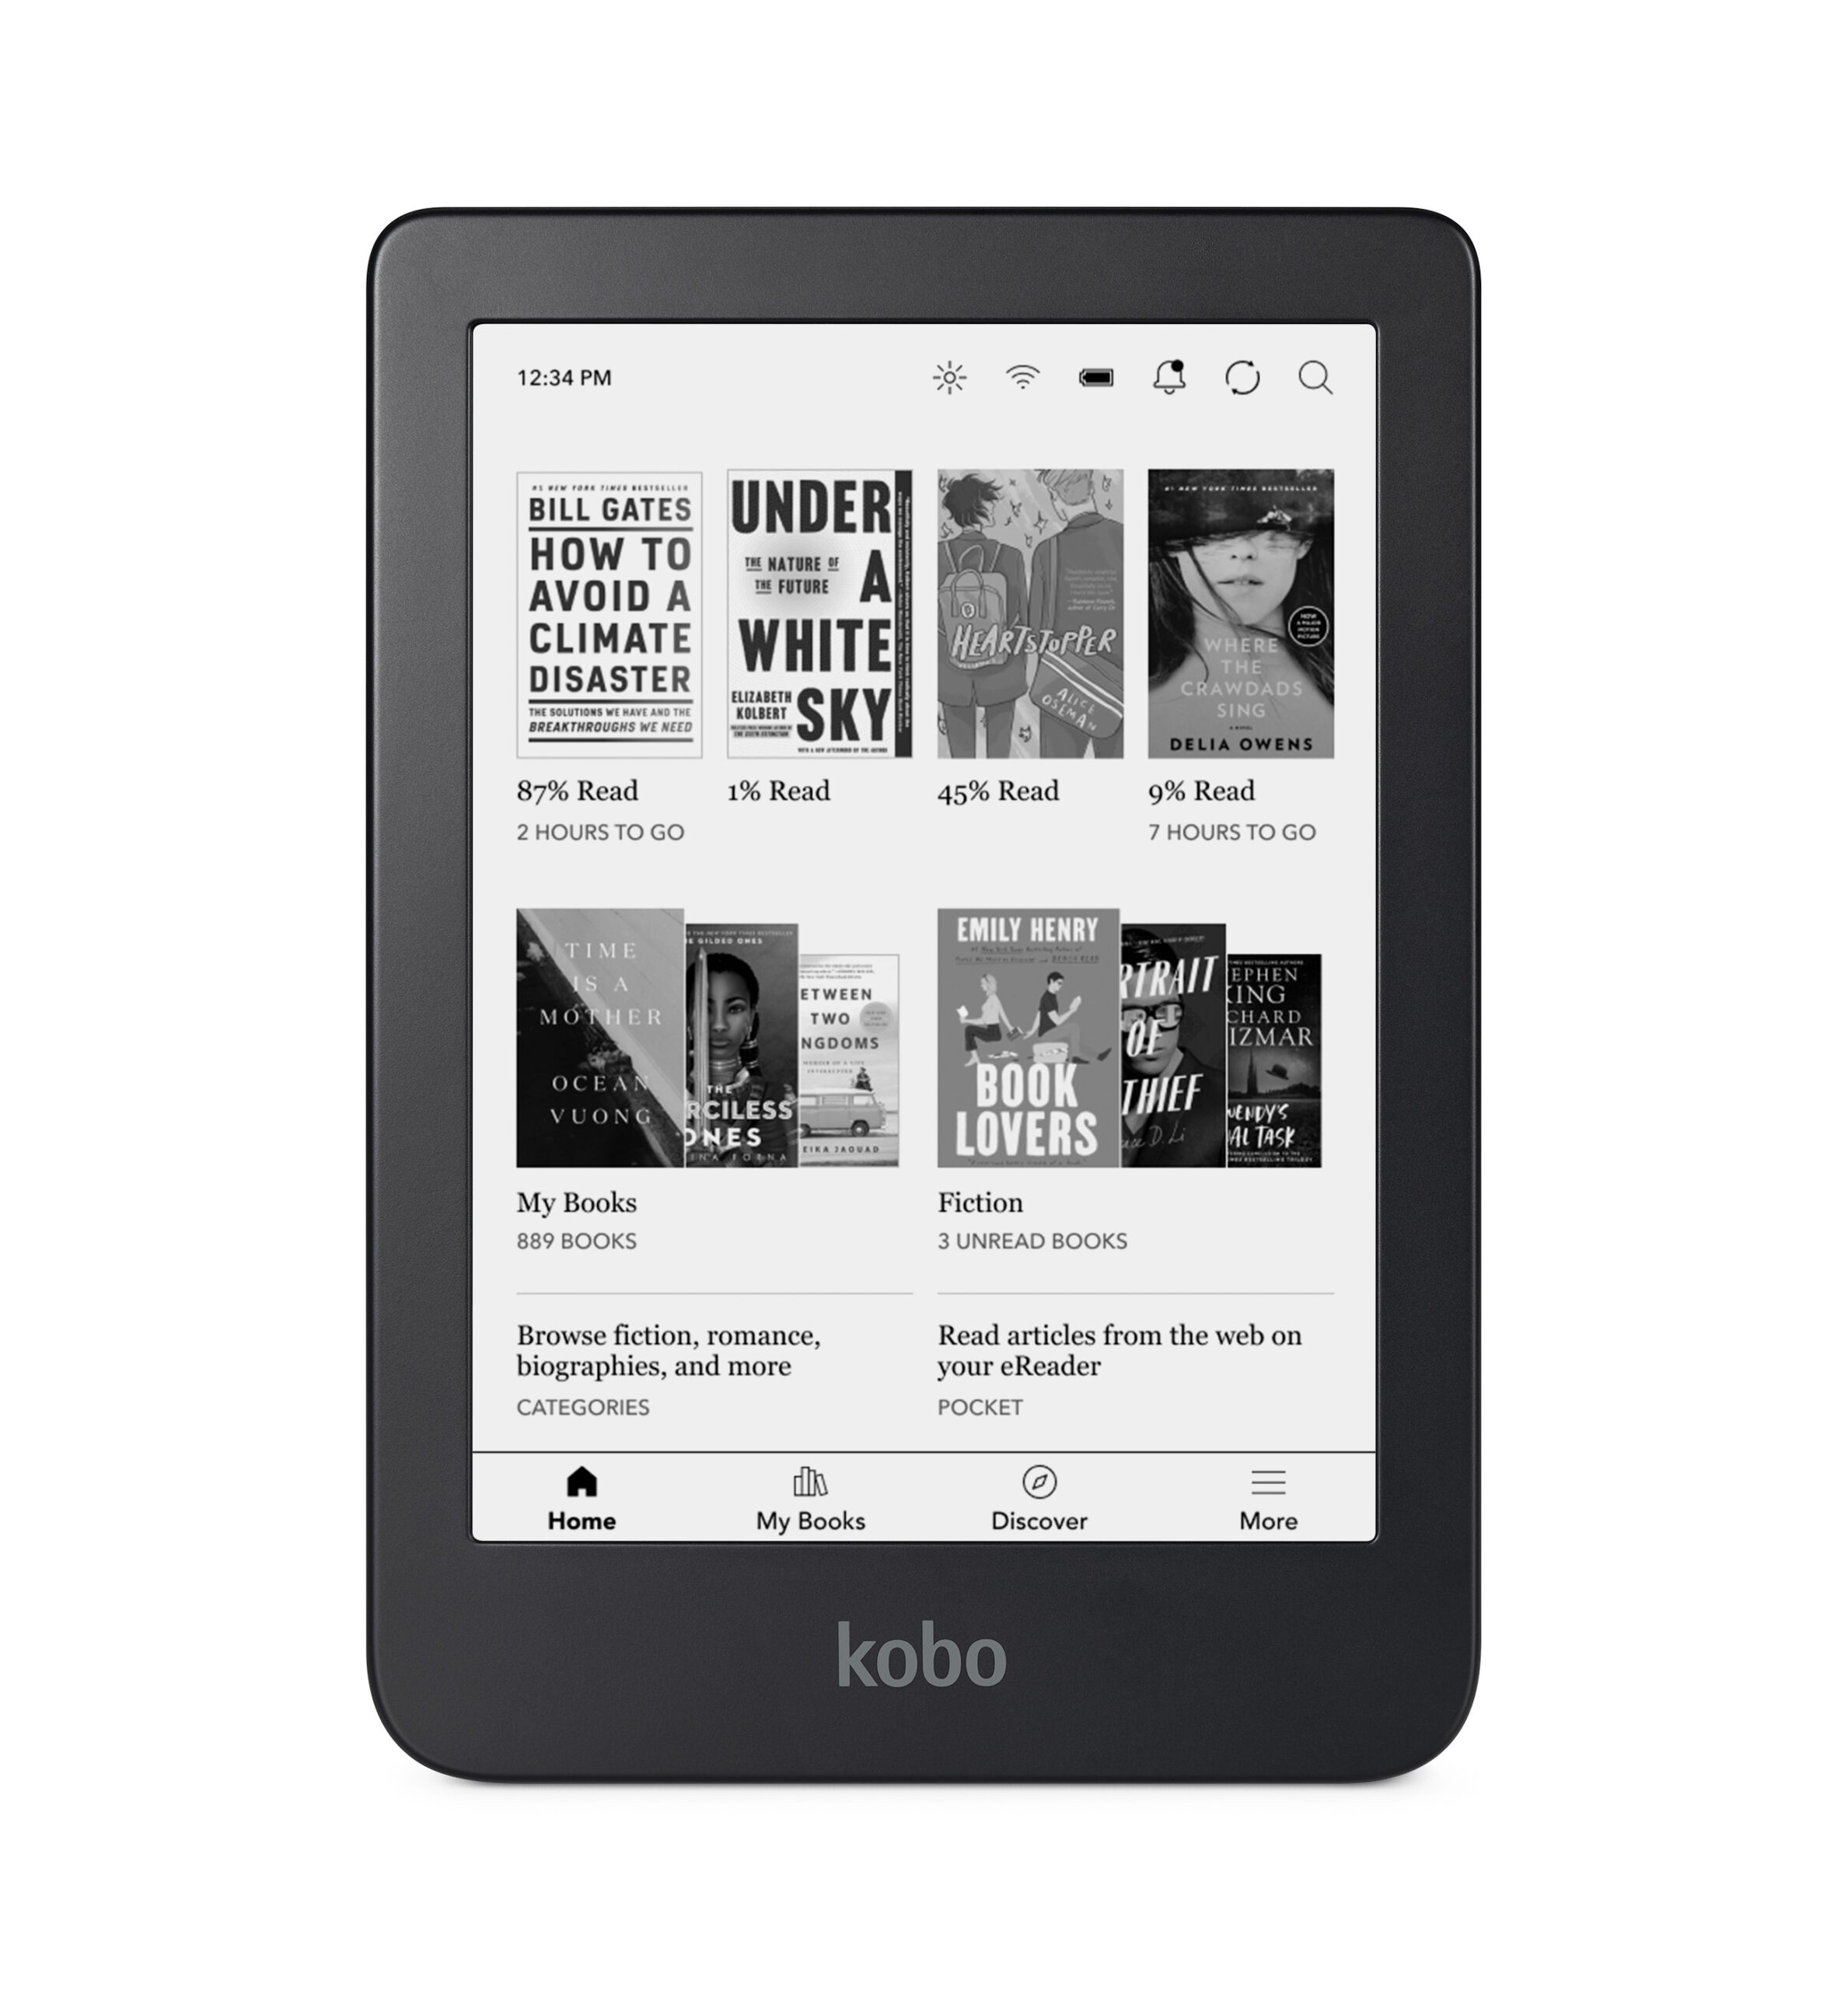 Kobo announces a new waterproof Kobo Clara 2E to compete with the